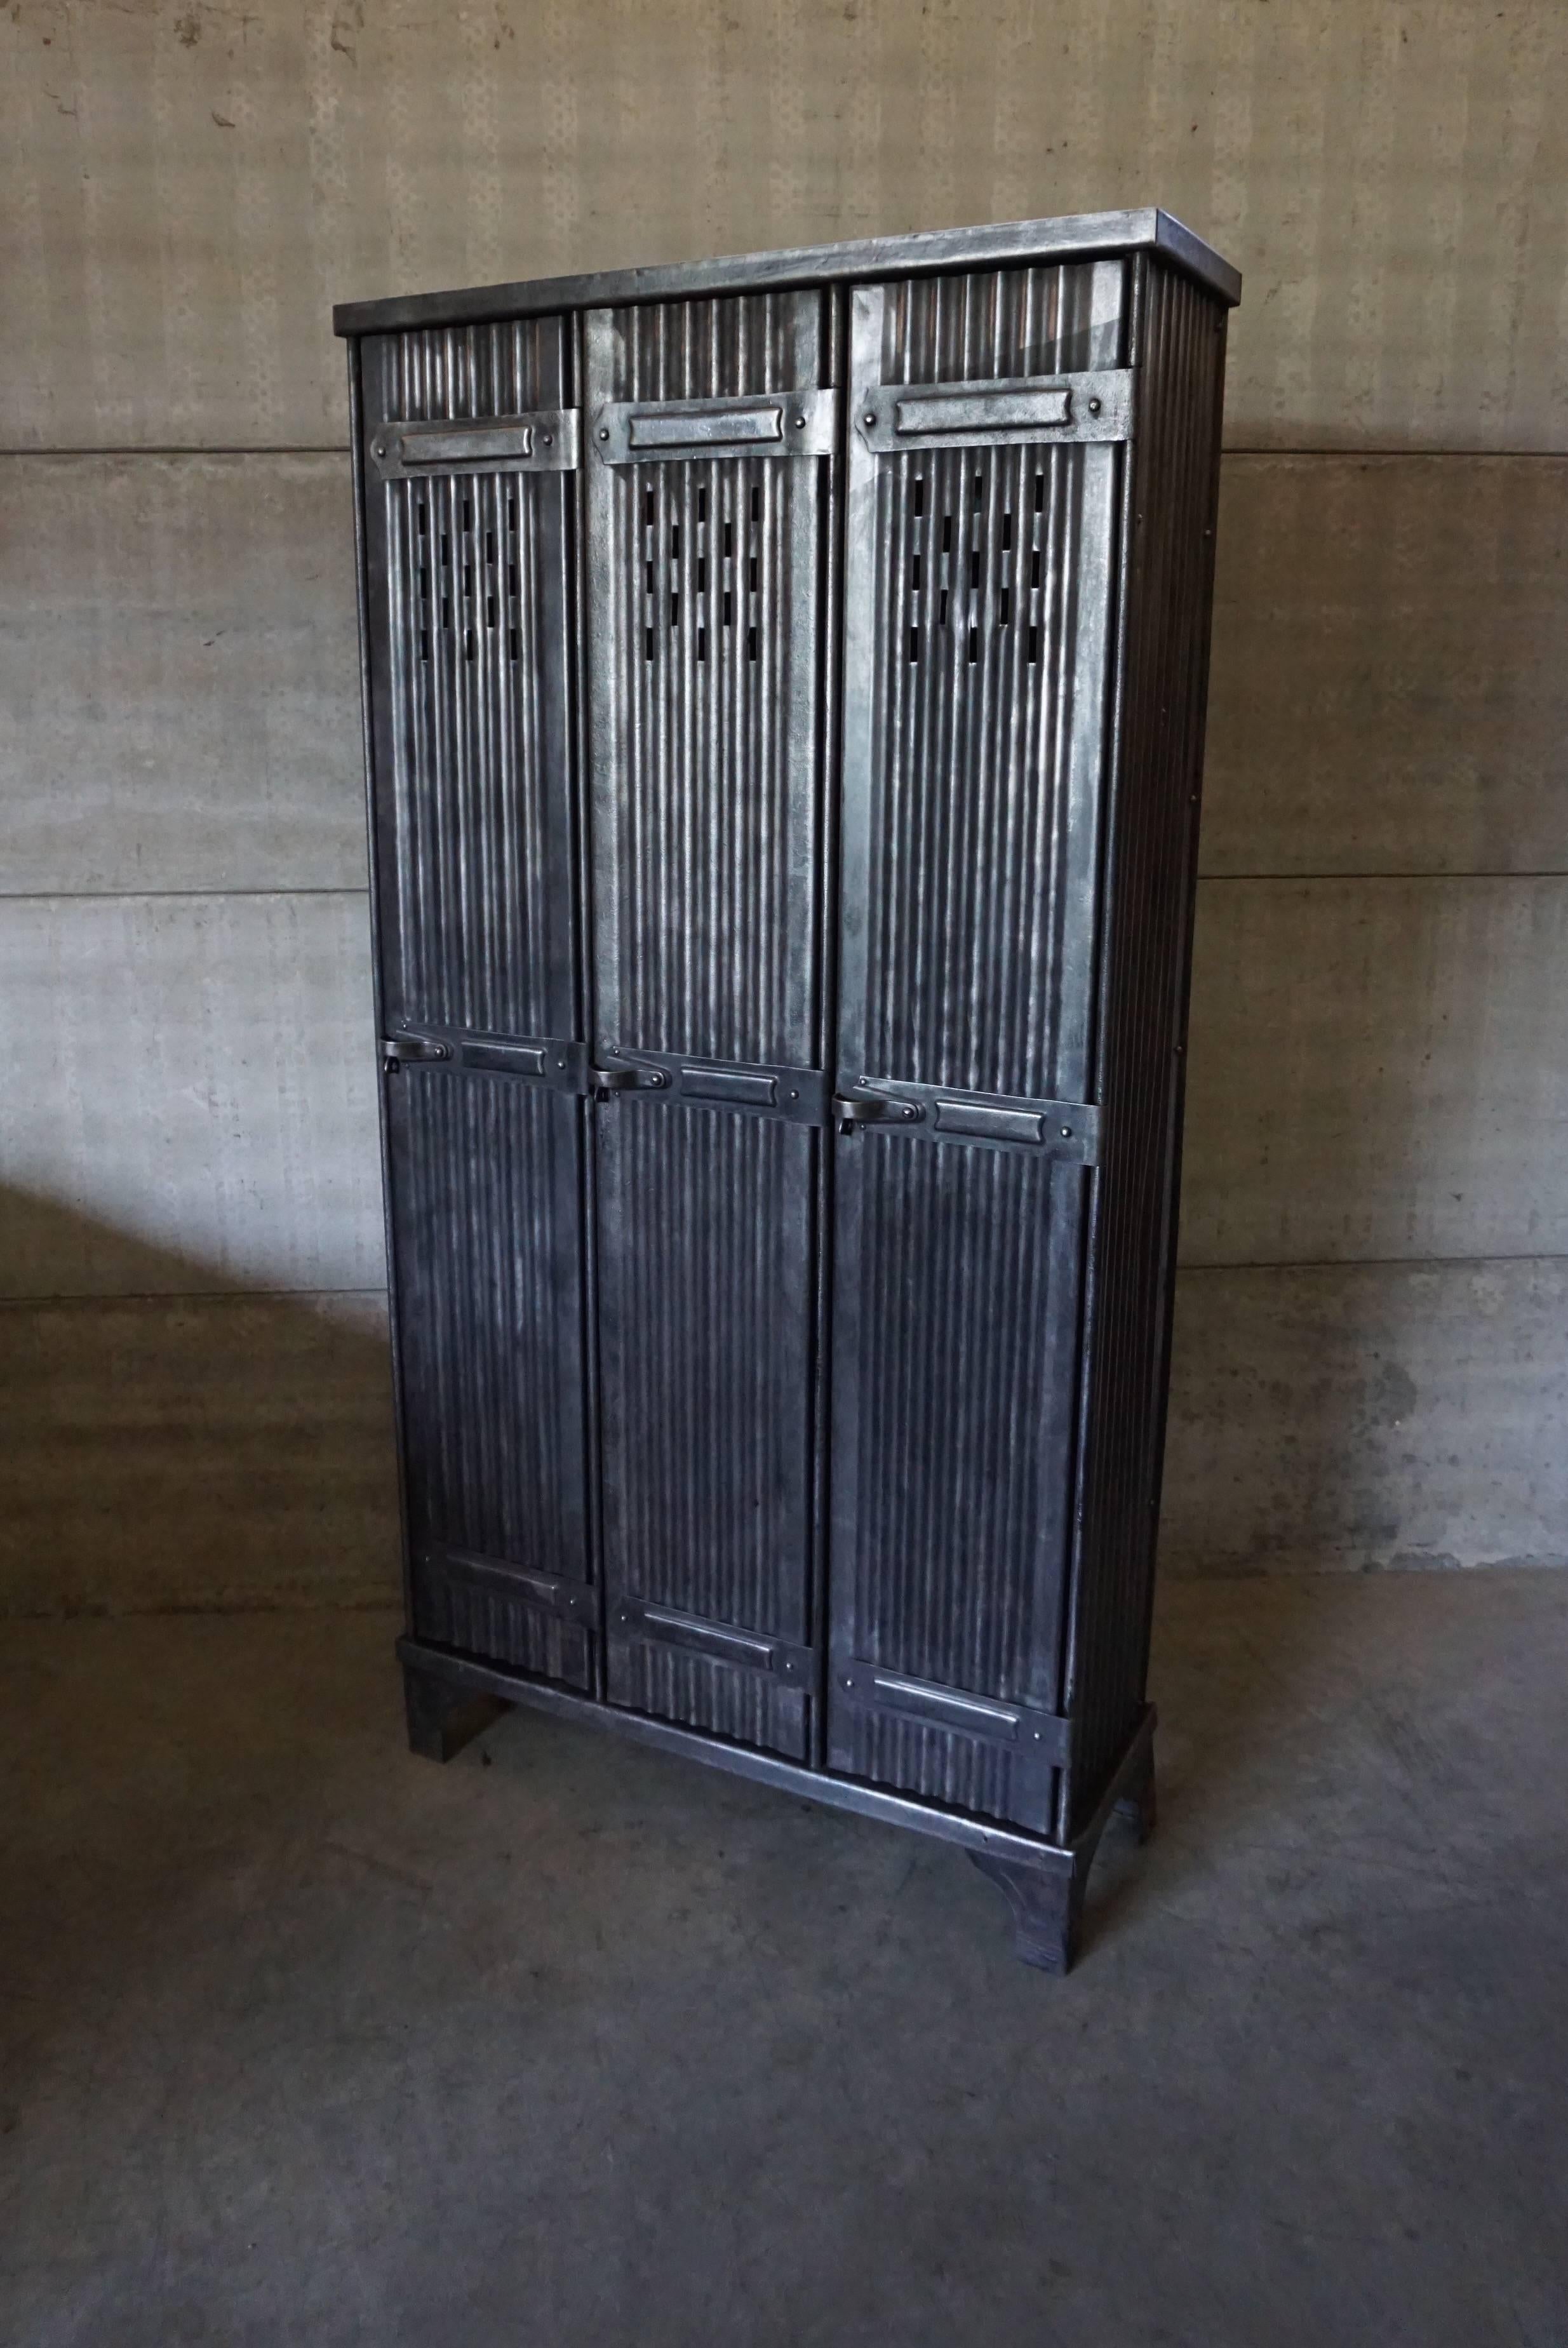 This vintage locker was manufactured by the French company Strafor. It is made entirely from metal and features three compartments. In a very good vintage restored condition.